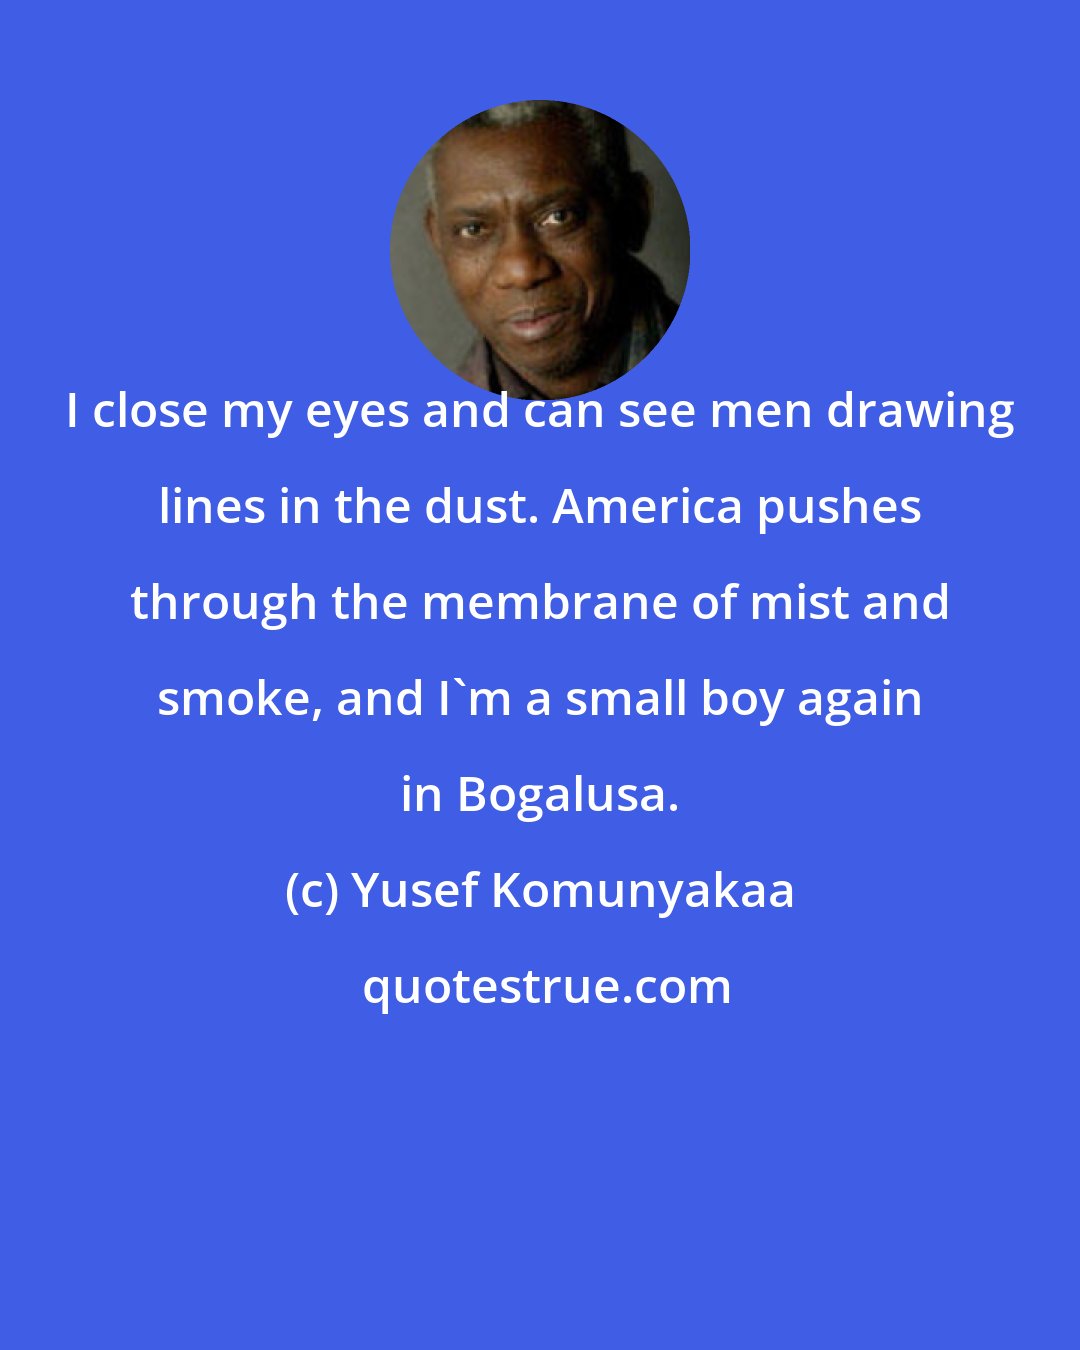 Yusef Komunyakaa: I close my eyes and can see men drawing lines in the dust. America pushes through the membrane of mist and smoke, and I'm a small boy again in Bogalusa.